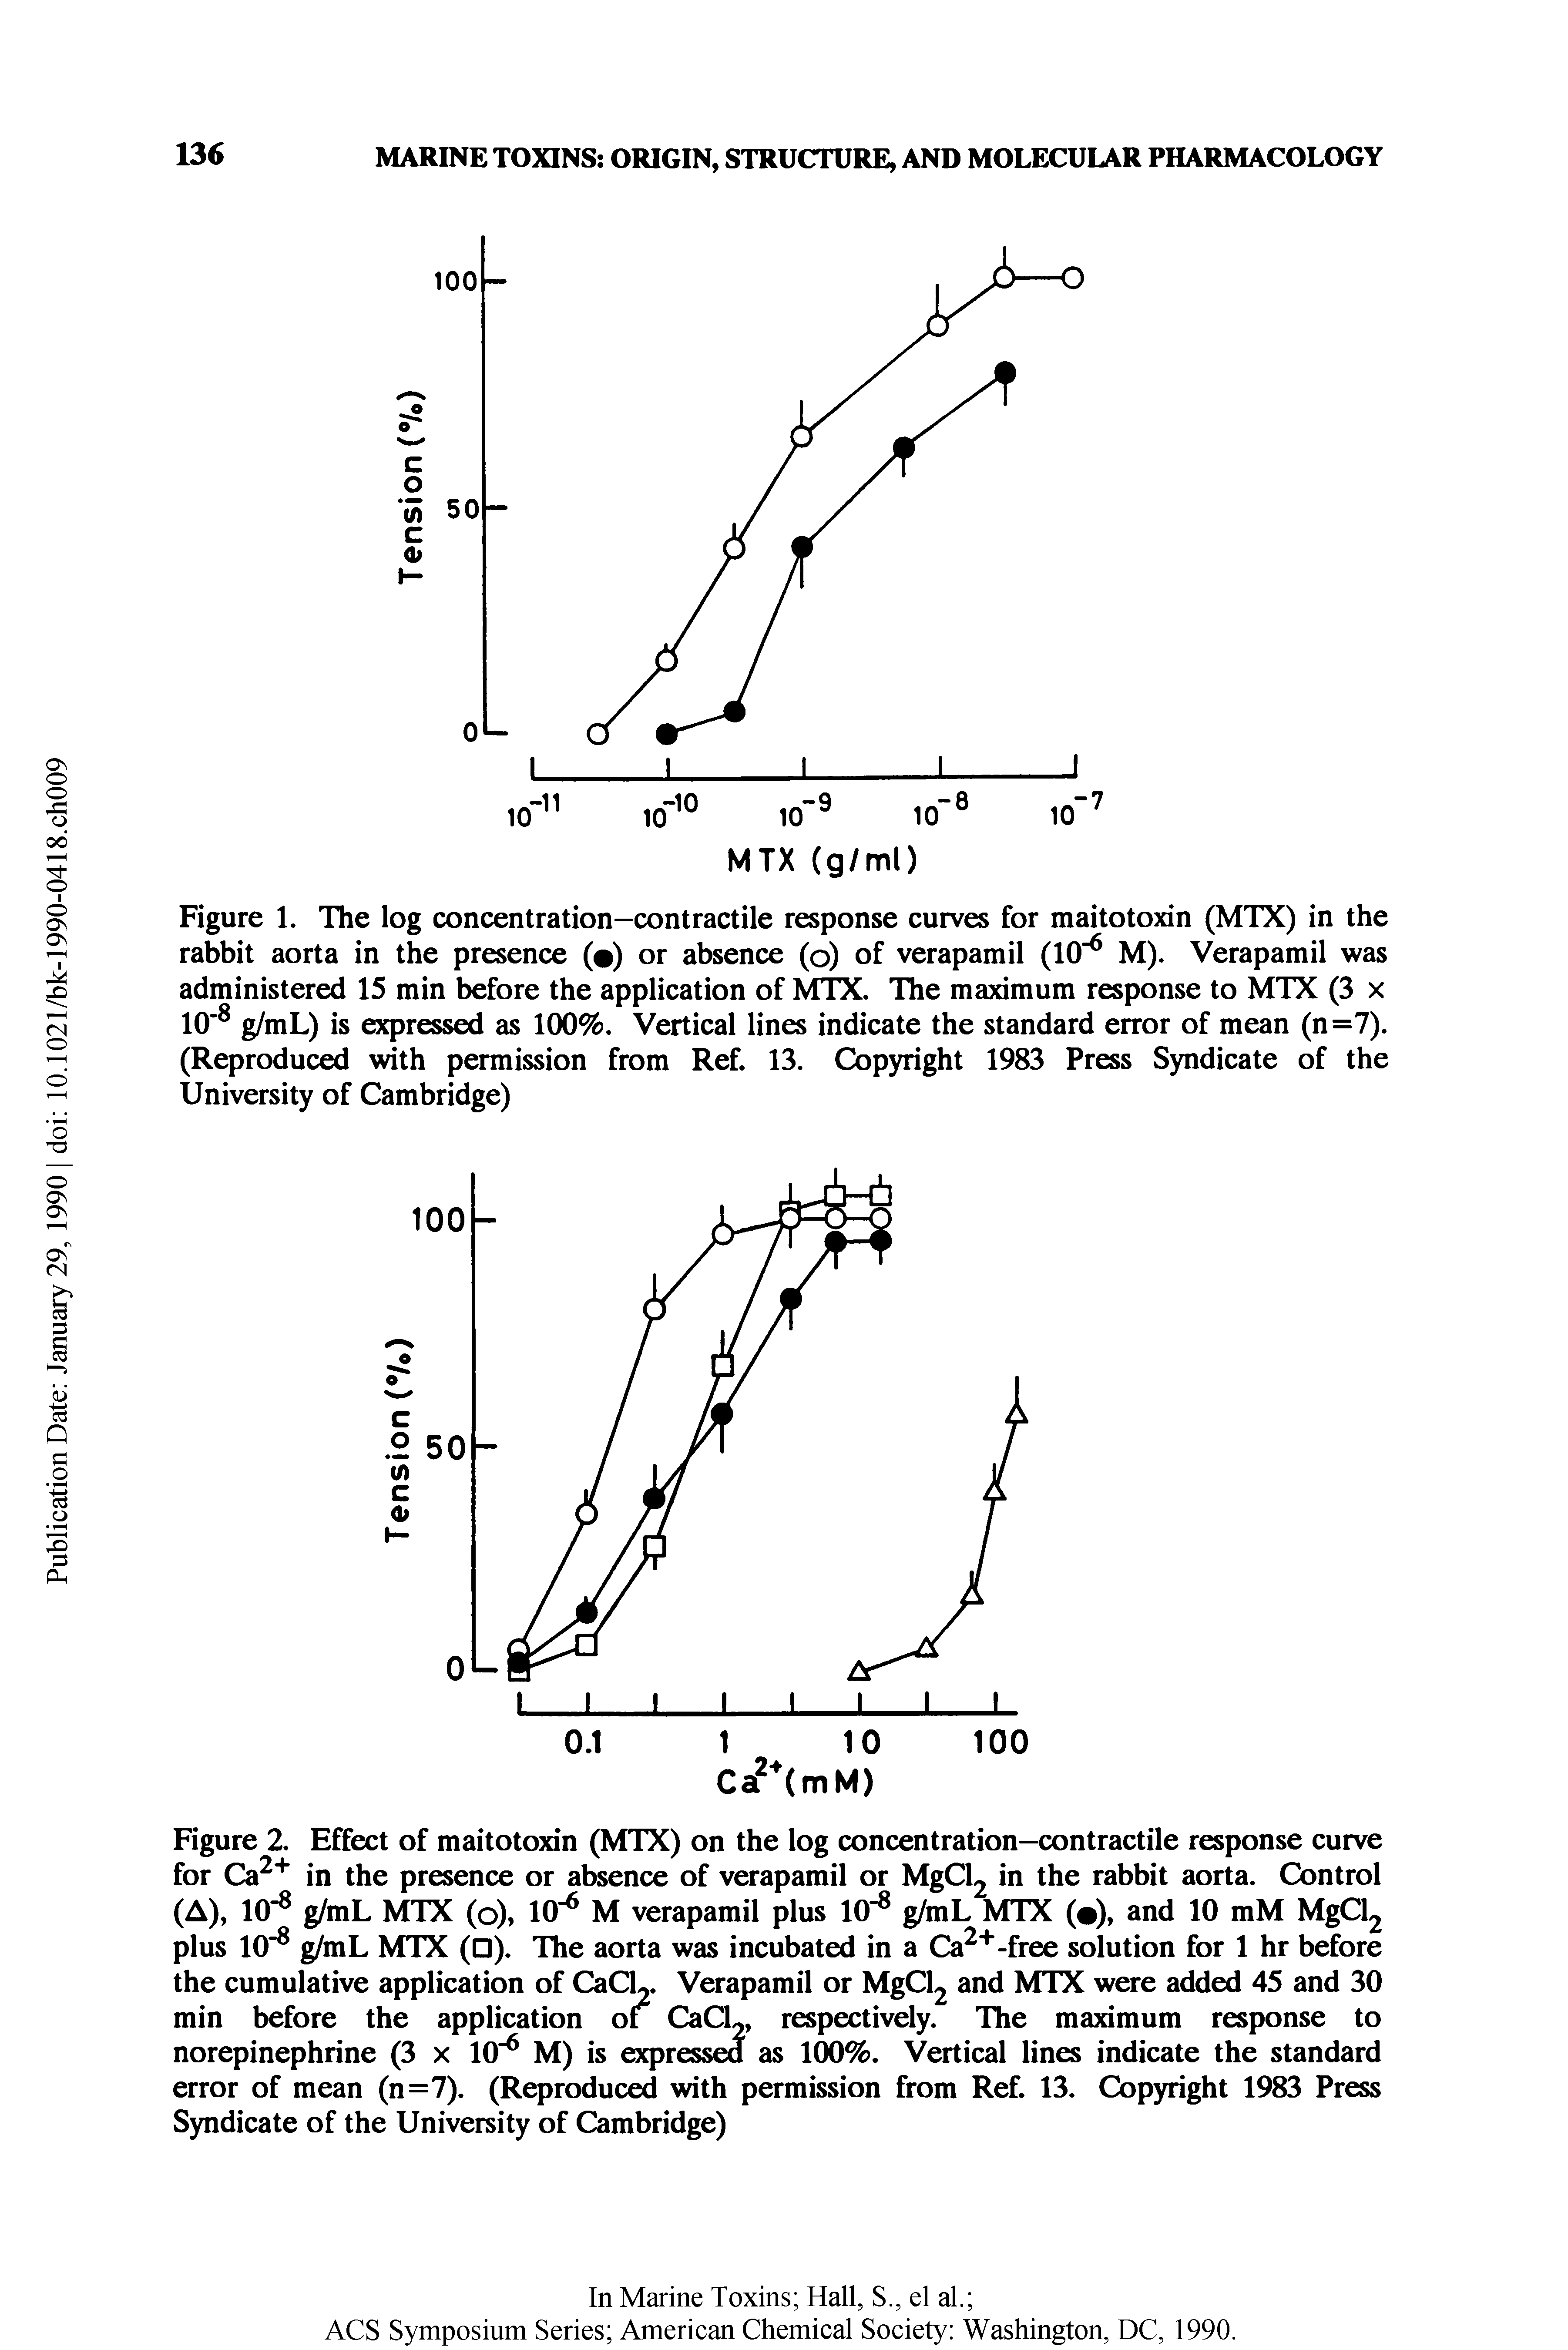 Figure 1. The log cx)ncentration-cx)ntractile response curves for maitotoxin (MTX) in the rabbit aorta in the presence ( ) or absence (o) of verapamil (10" M). Verapamil was administered 15 min before the application of MTX. The maximum response to MTX (3 x 10 g/mL) is expressed as 100%. Vertical lines indicate the standard error of mean (n=7). (Reproduced with permission from Ref. 13. Copyright 1983 Press Syndicate of the University of Cambridge)...